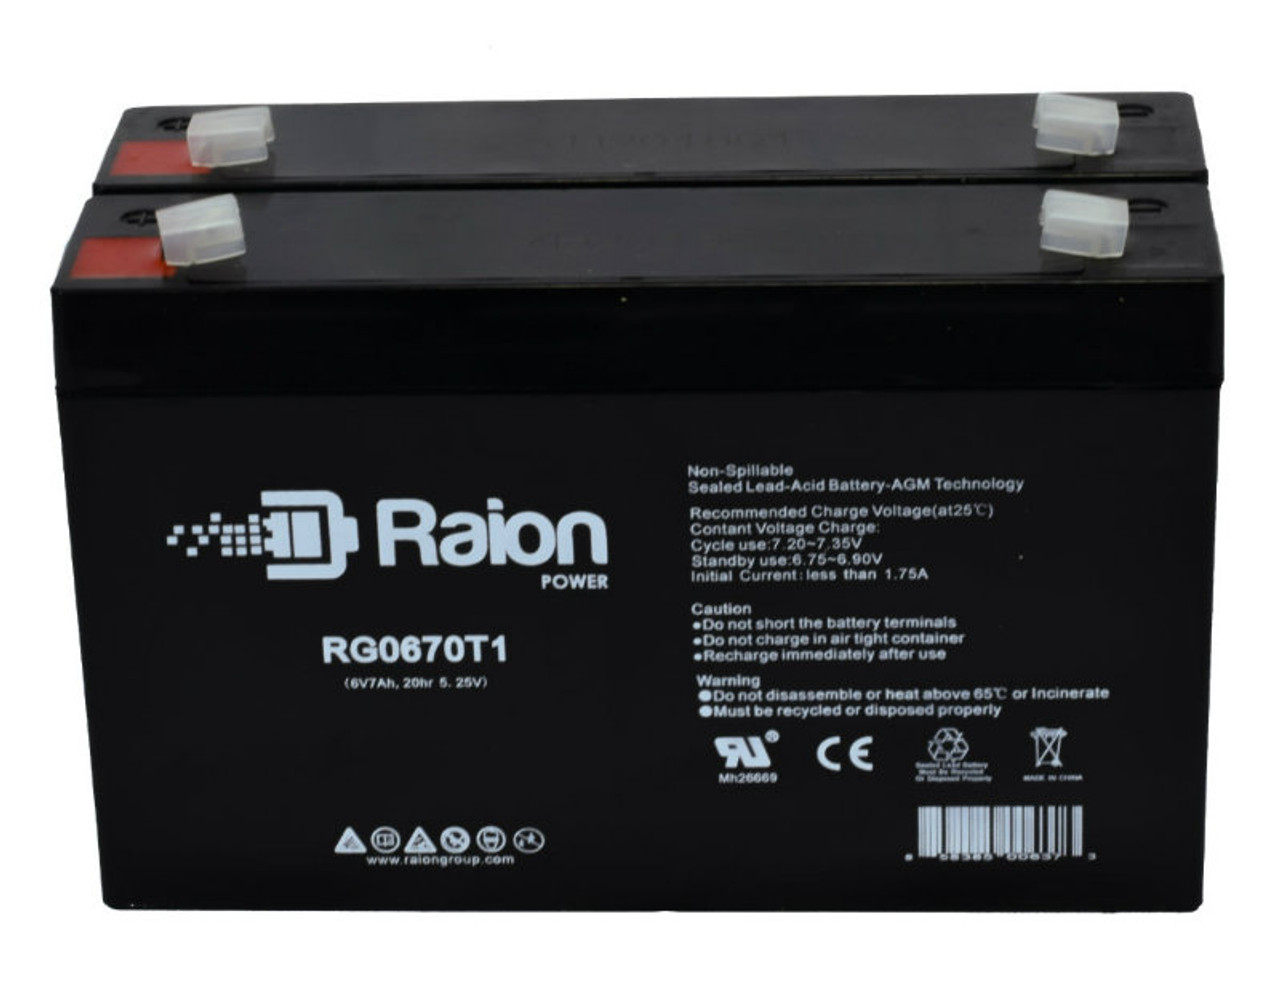 Raion Power RG0670T1 6V 7Ah Replacement Emergency Light Battery for Edwards 1603 - 2 Pack